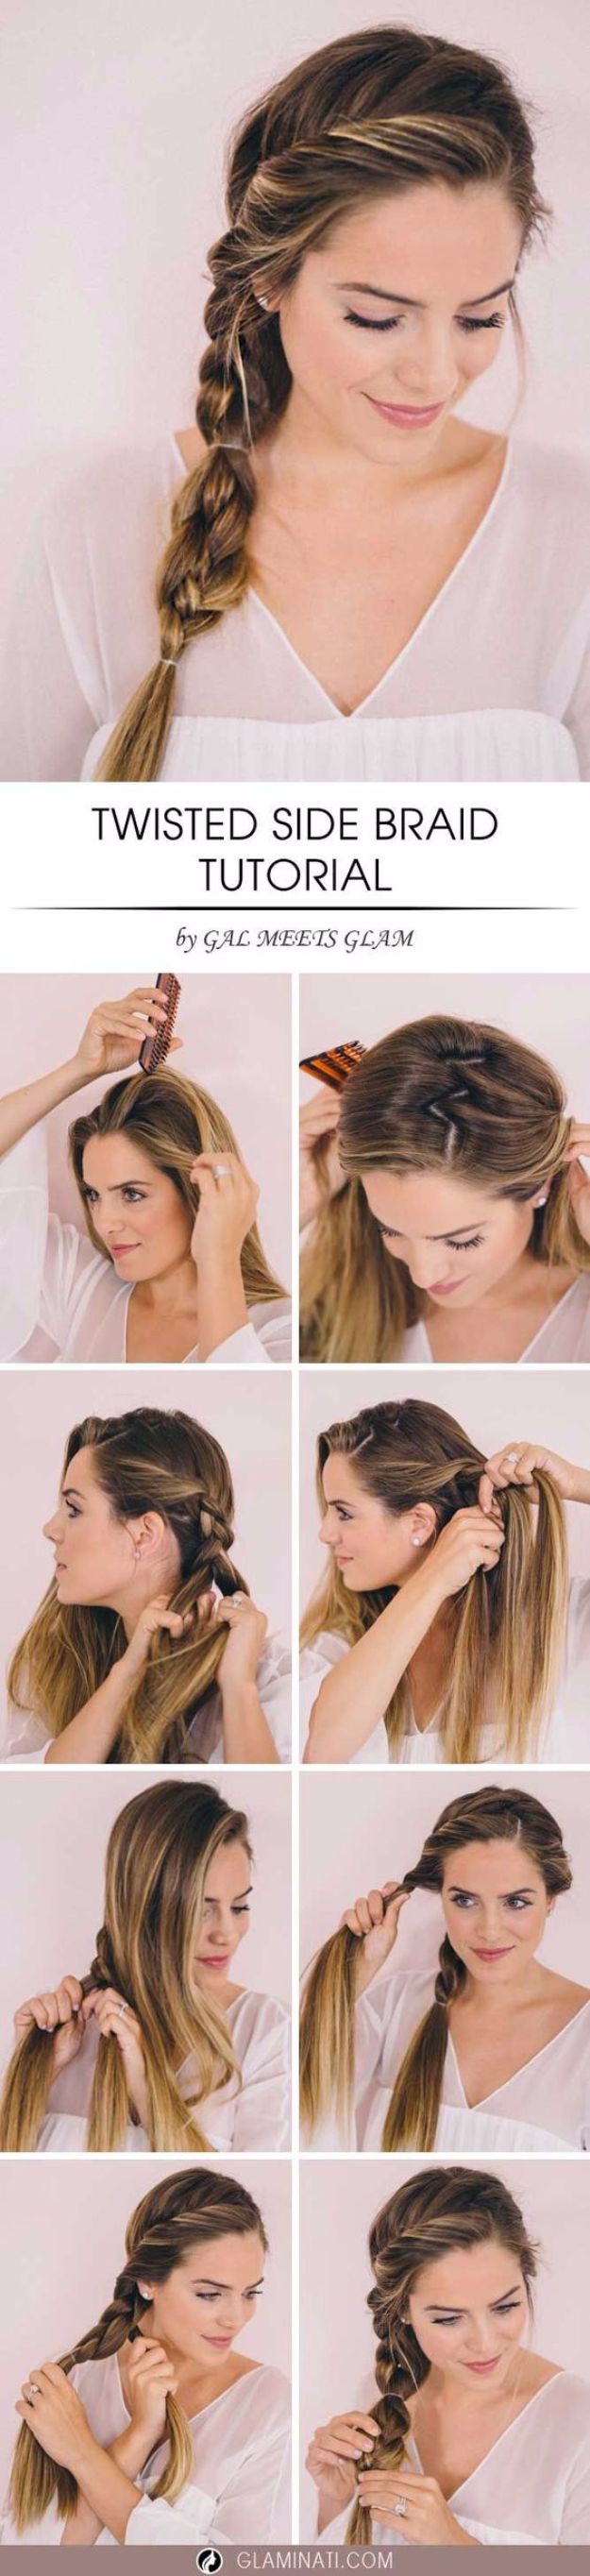 Easy Braids With Tutorials - Twisted Side Braid - Cute Braiding Tutorials for Teens, Girls and Women - Easy Step by Step Braid Ideas - Quick Hairstyles for School - Creative Braids for Teenagers - Tutorial and Instructions for Hair Braiding